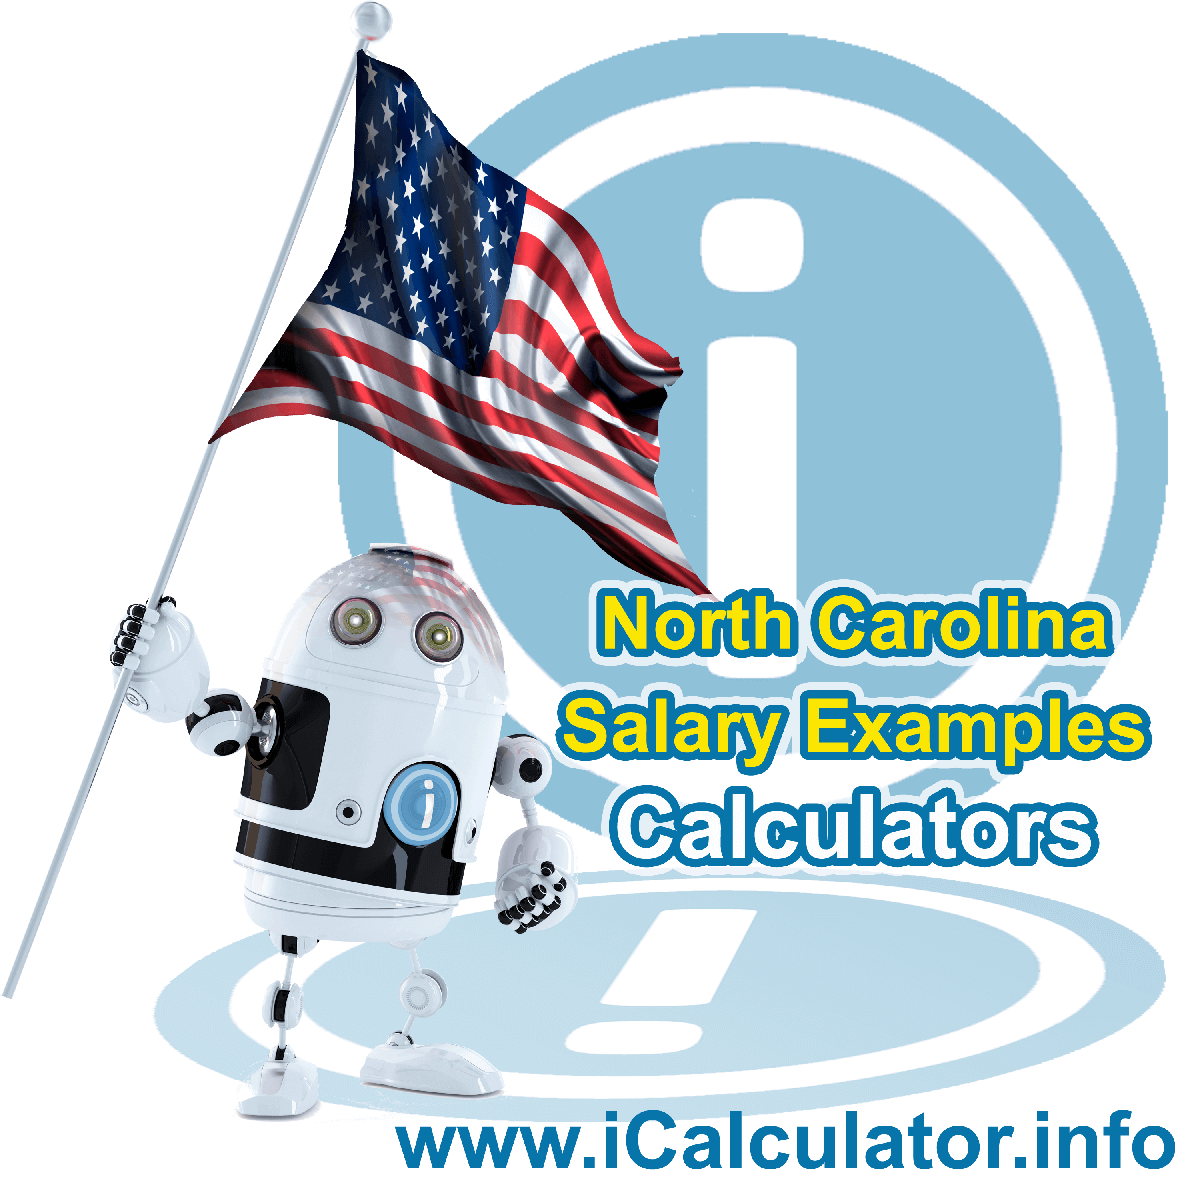 North Carolina Salary Example for $ 160,000.00 in 2023 | iCalculator™ | $ 160,000.00 salary example for employee and employer paying North Carolina State tincome taxes. Detailed salary after tax calculation including North Carolina State Tax, Federal State Tax, Medicare Deductions, Social Security, Capital Gains and other income tax and salary deductions complete with supporting North Carolina state tax tables 